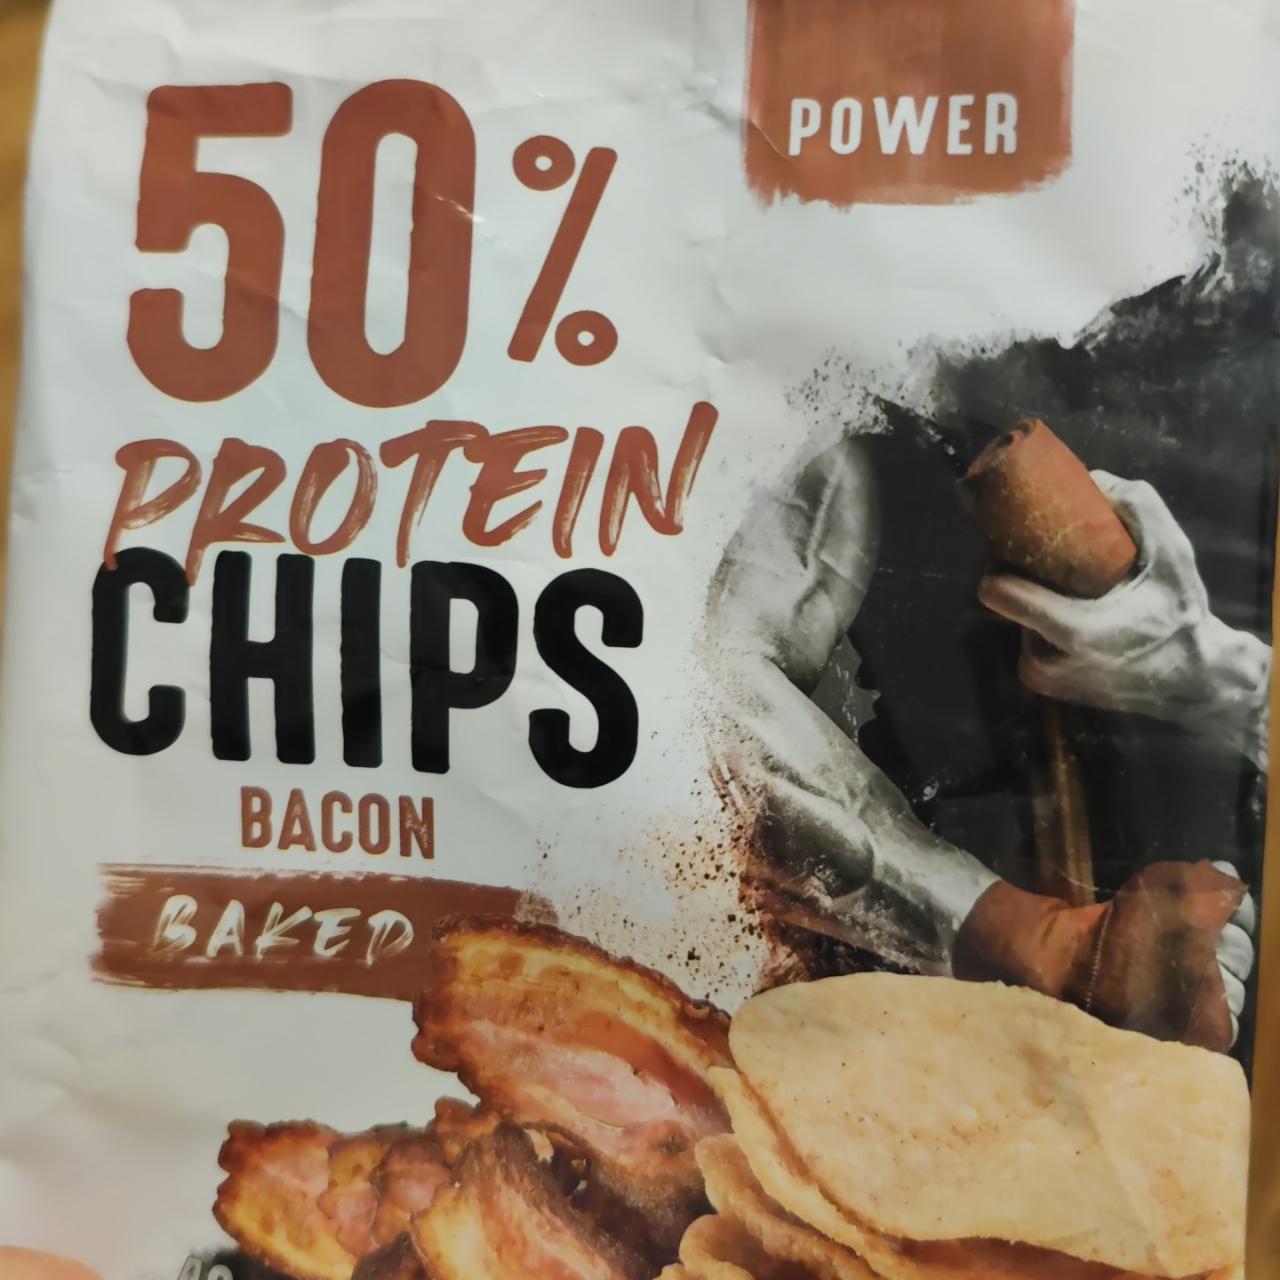 Zdjęcia - 50% protein Chips Bacon baked Power